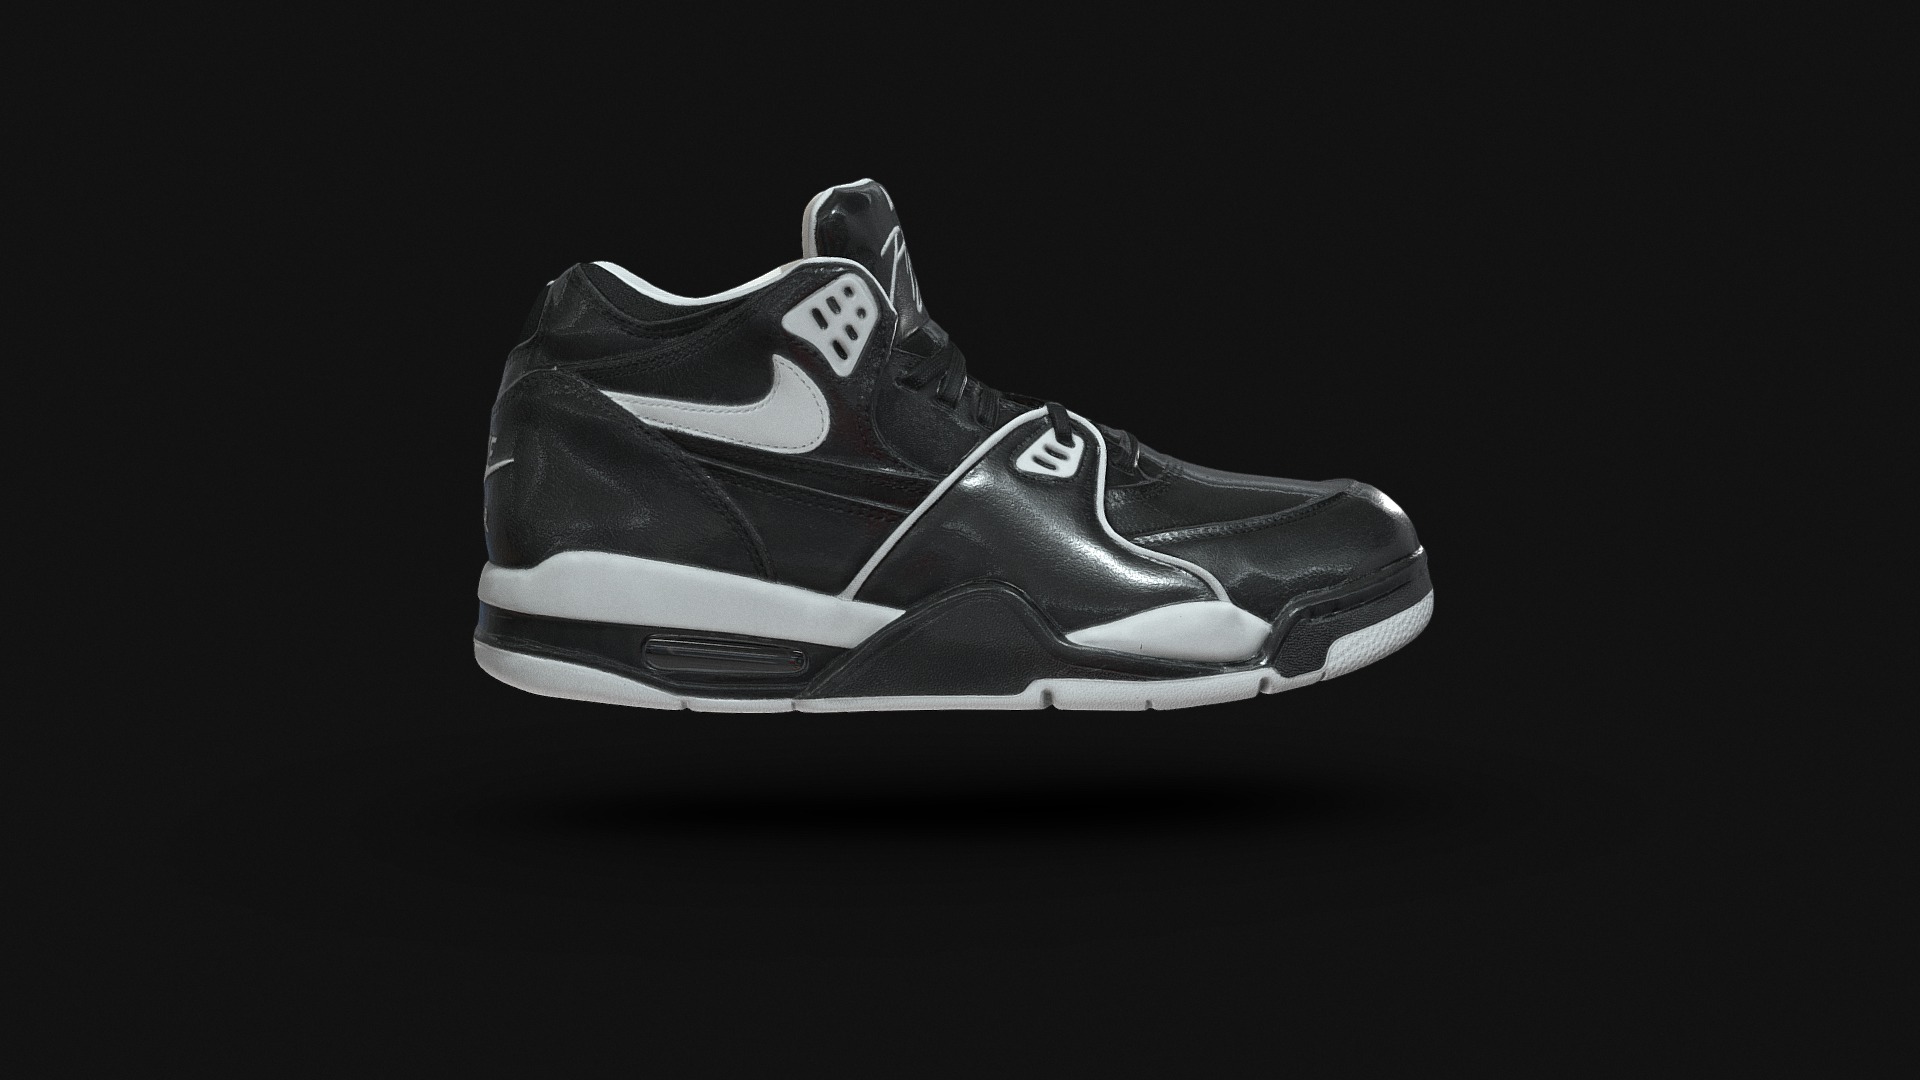 3D model Nike Air Flight 89 Scan - This is a 3D model of the Nike Air Flight 89 Scan. The 3D model is about a black and white shoe.